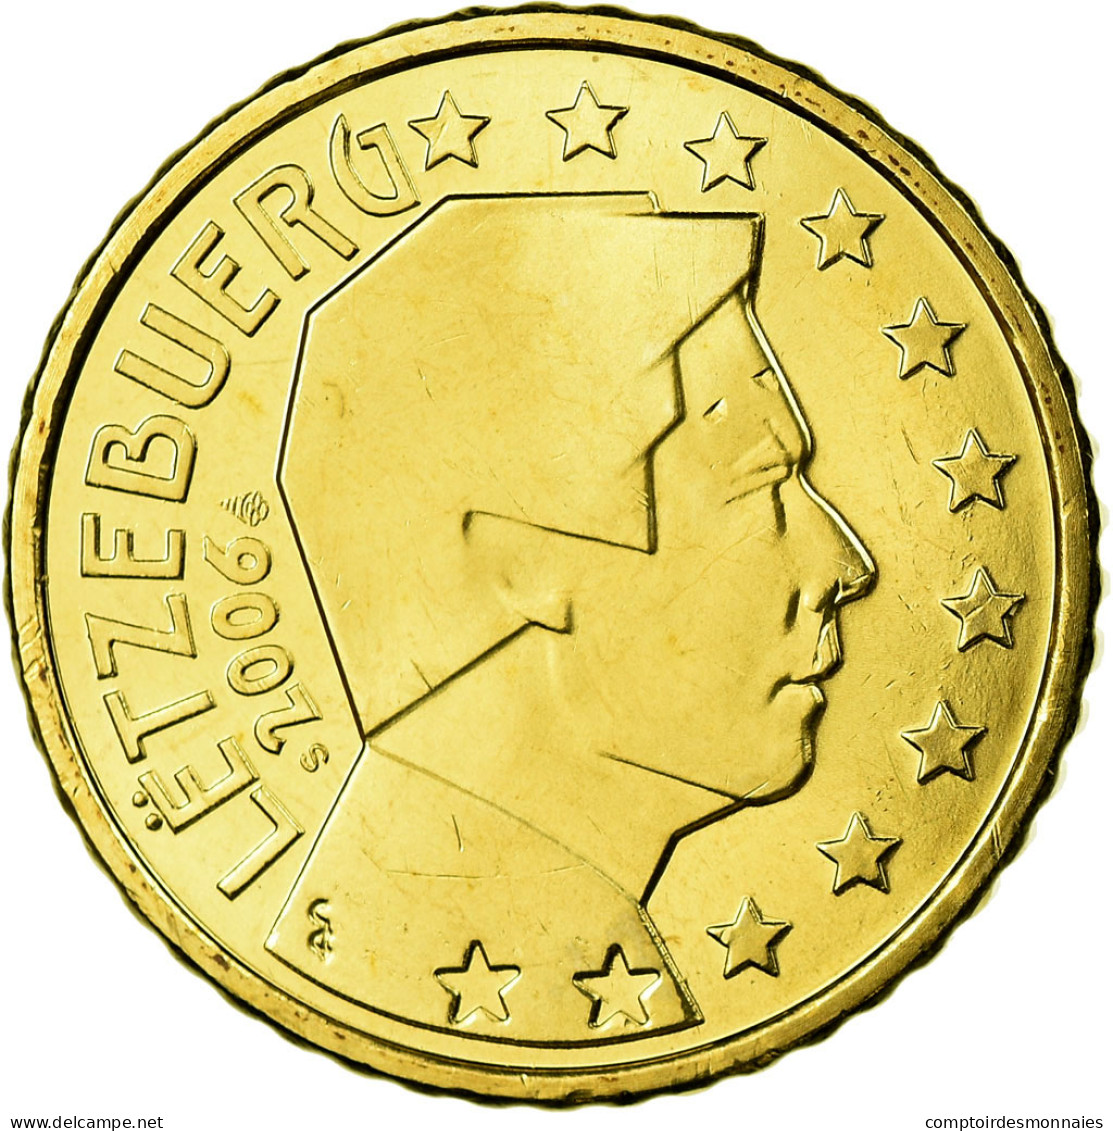 Luxembourg, 50 Euro Cent, 2006, FDC, Laiton, KM:80 - Luxembourg